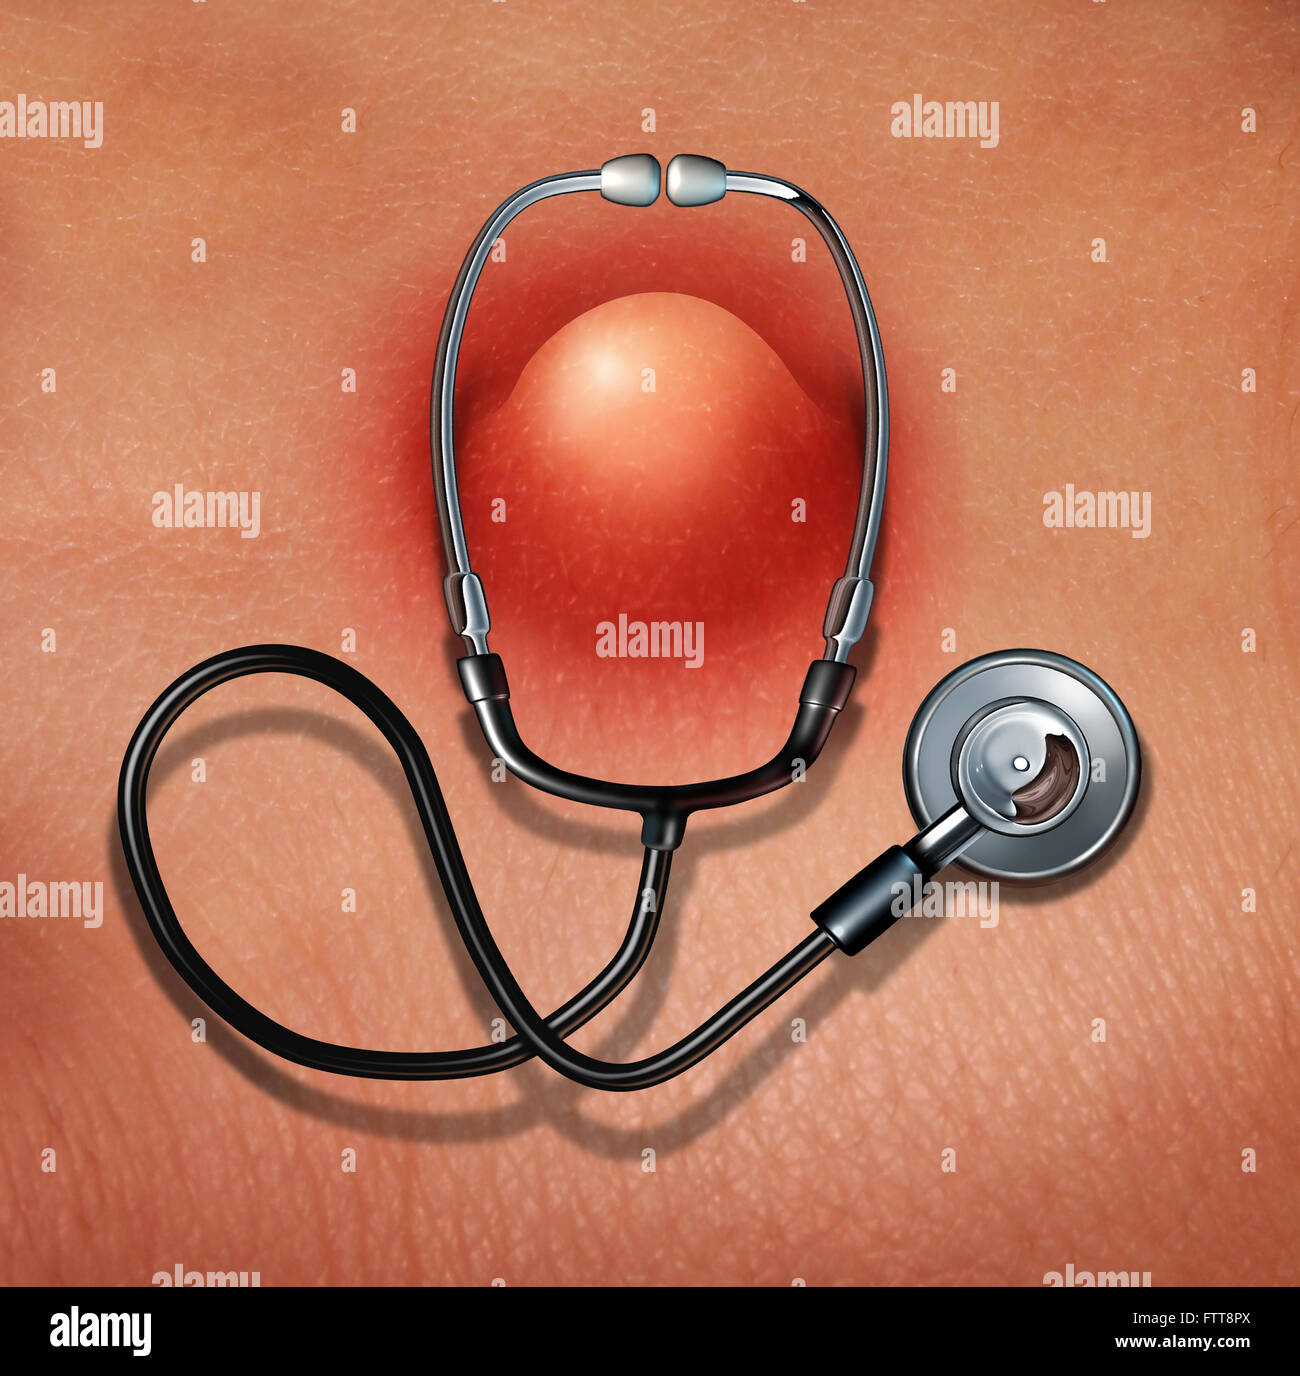 Dermatology skin medicine concept as a dermatologist doctor stethoscope wrapped arround a pimple as a medical symbol for human skincare or diagnosis of epidermis symptoms. Stock Photo